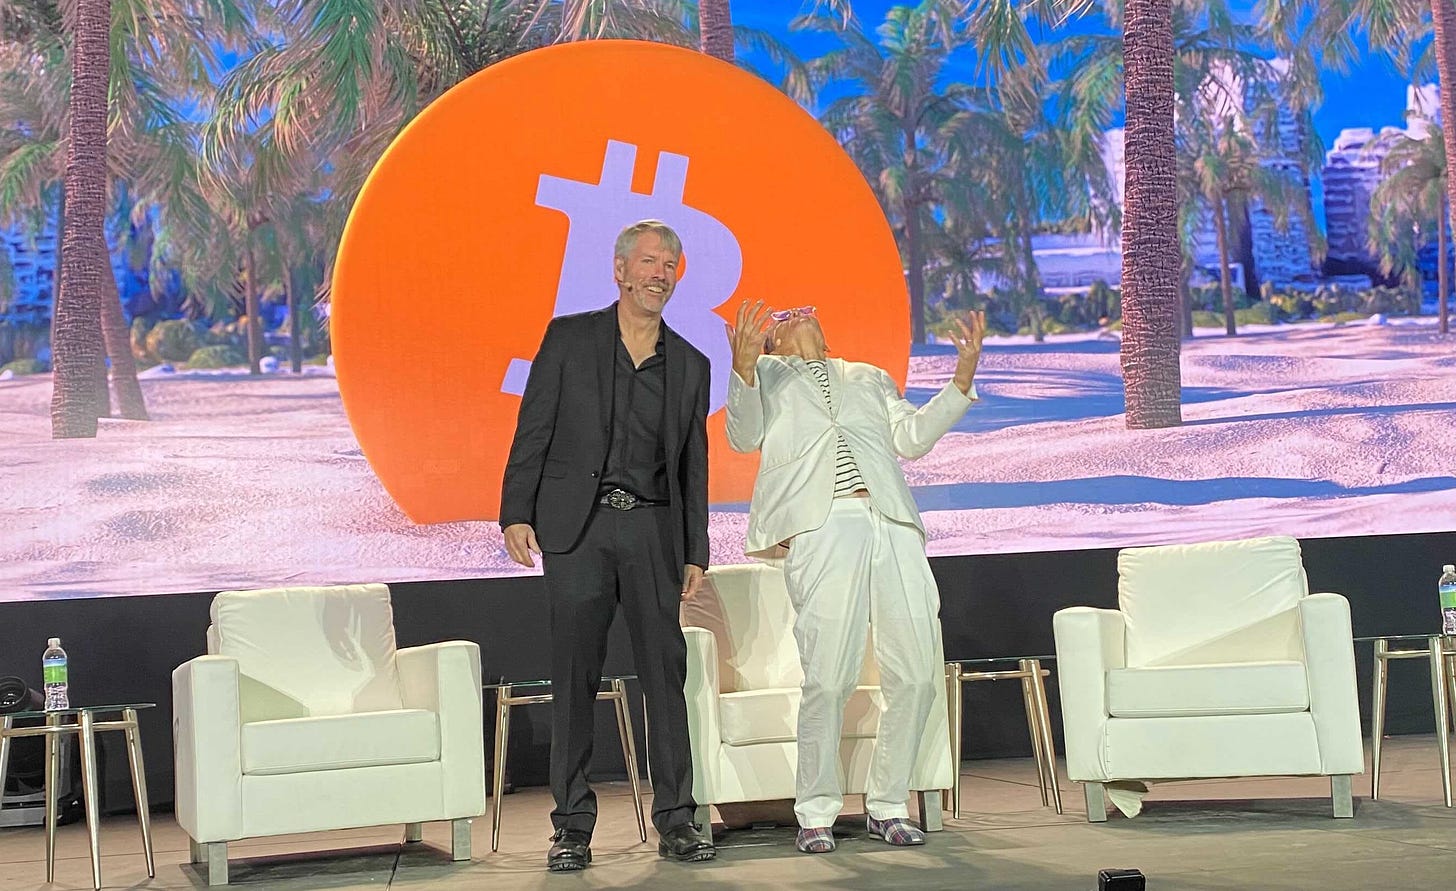 Michael Saylor⚡️ on X: "Thank you 🙏 to all the cyber hornets 🐝 for your  energizing support 🔥 at @TheBitcoinConf in Miami today. Maybe @maxkeiser &  I couldn't agree on the color